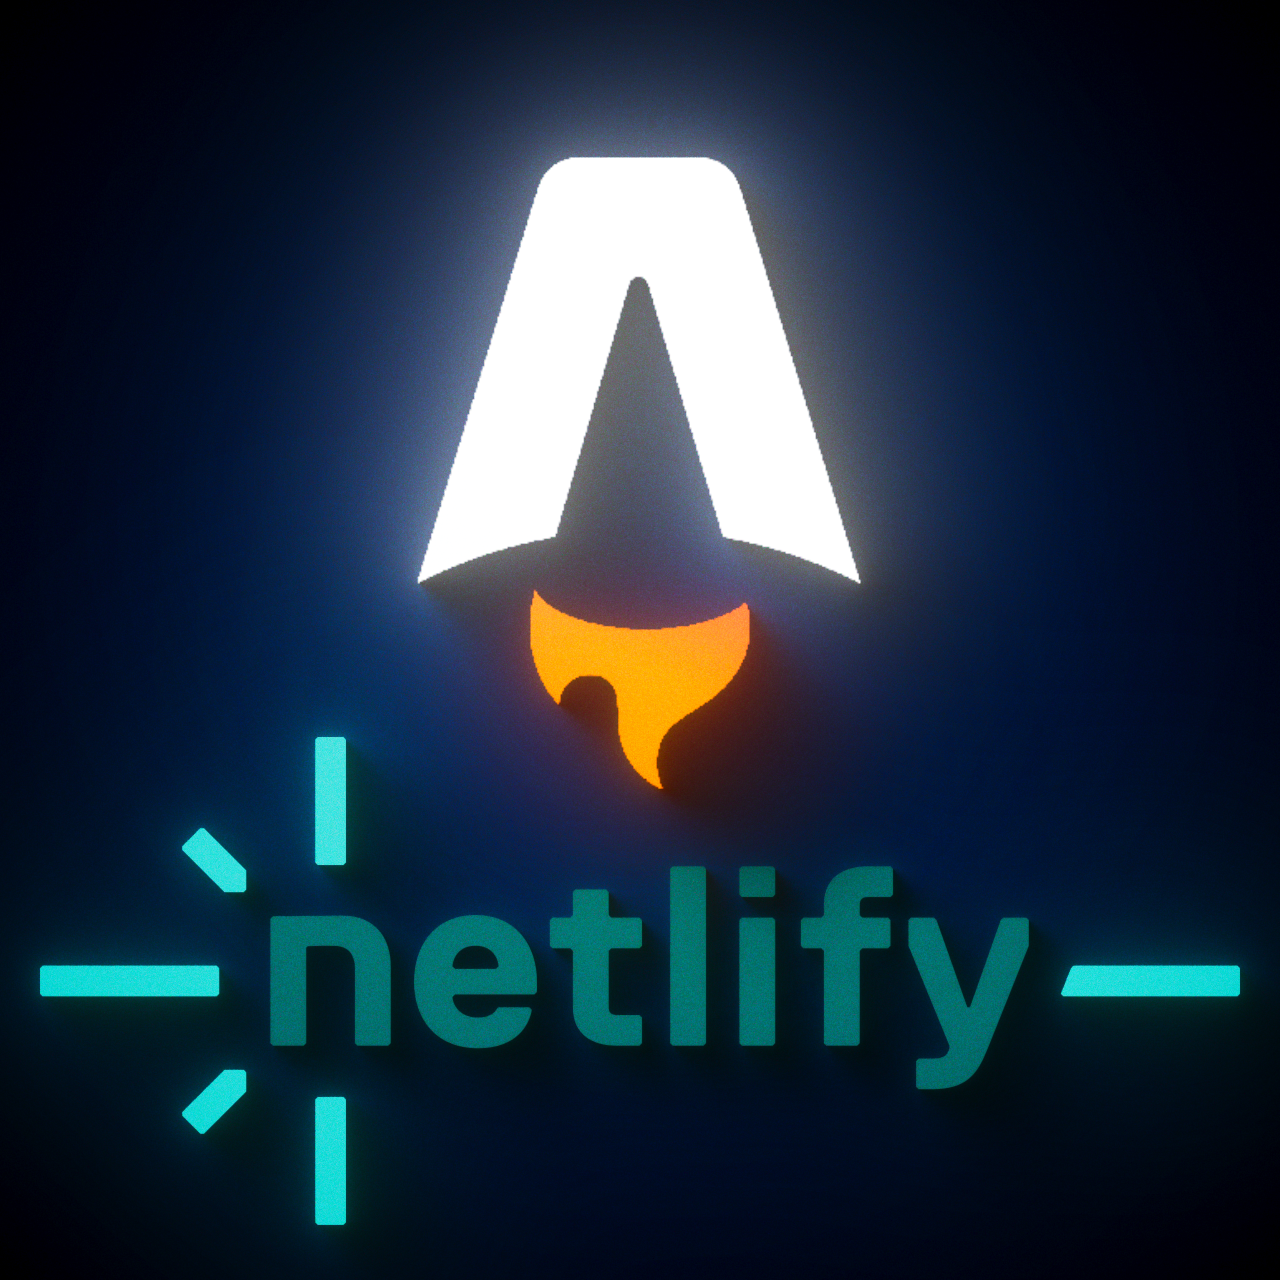 Updated my Site with Astro + Netlify